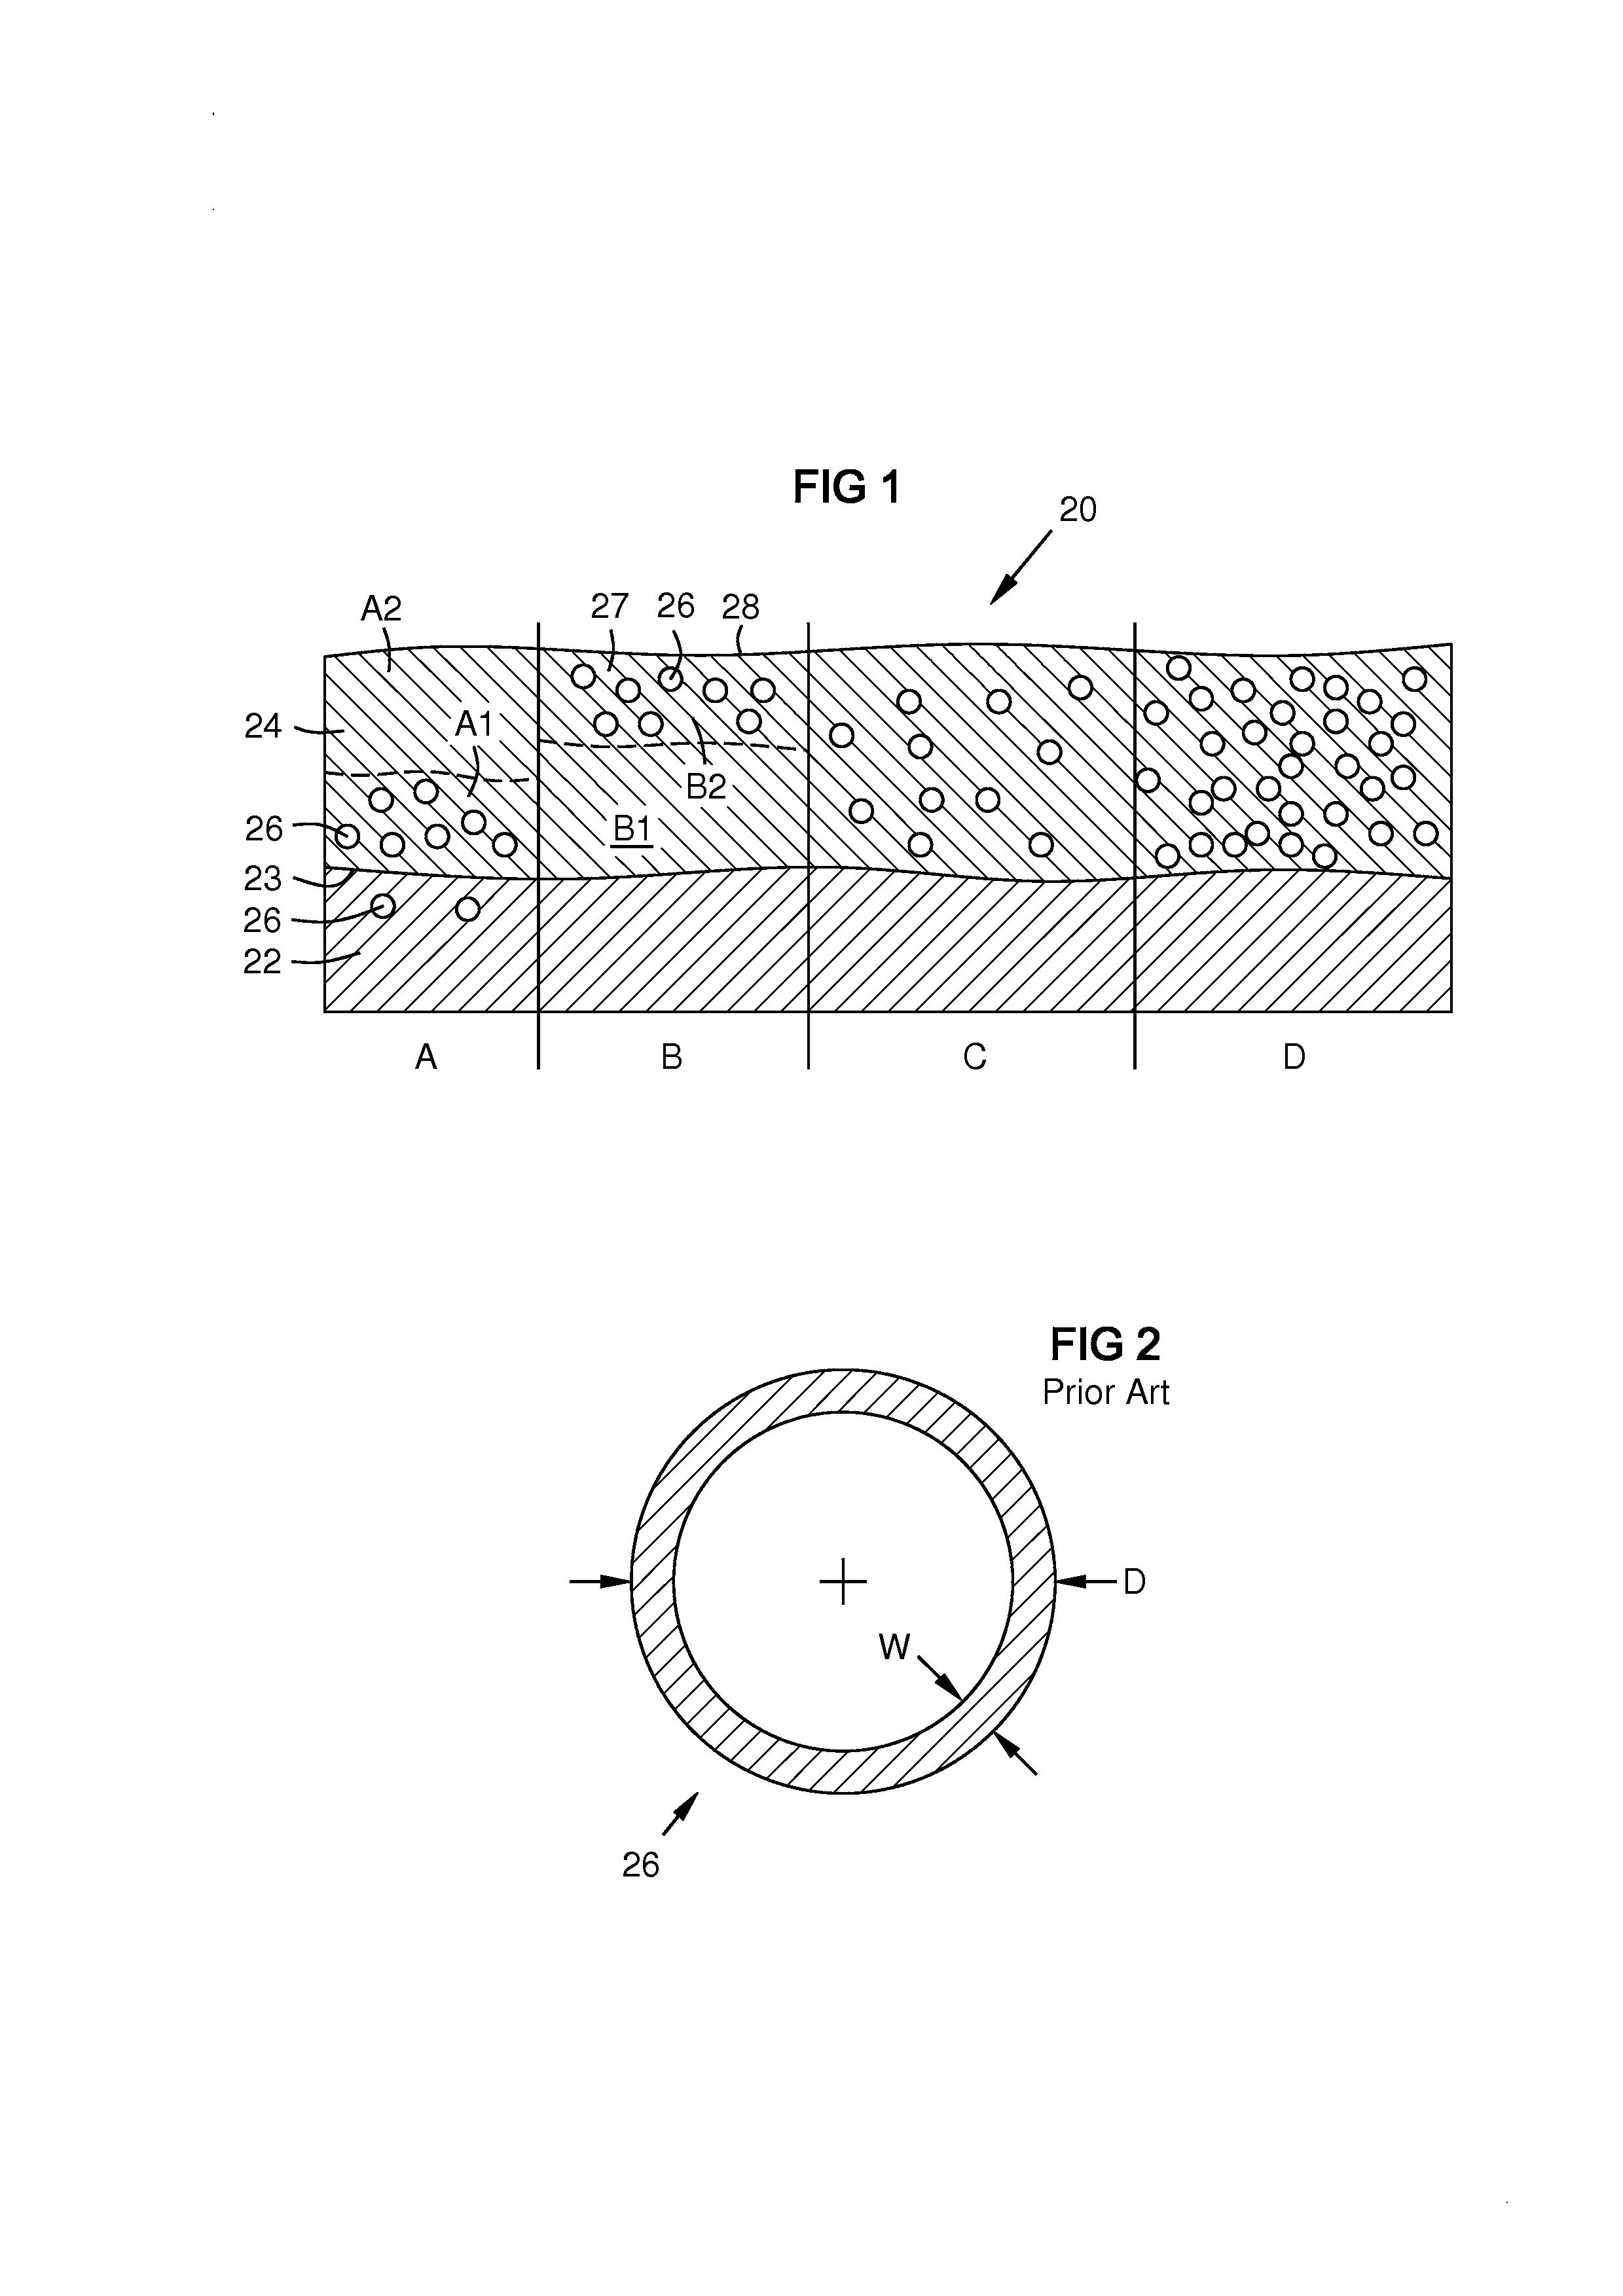 Powder-based material system with stable porosity